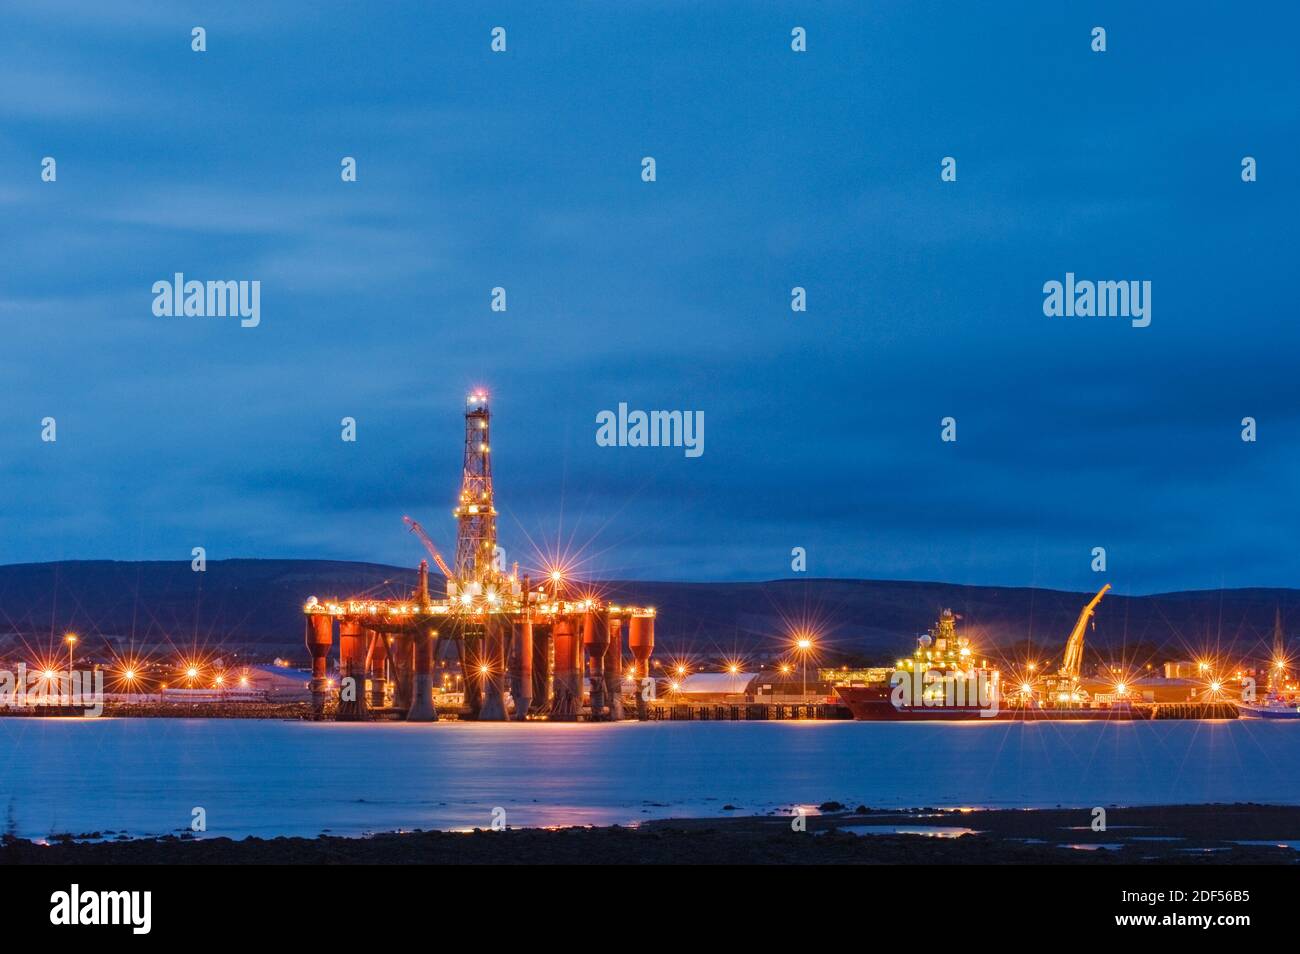 Oil drilling platforms moored in Cromarty Firth, Scotland Stock Photo